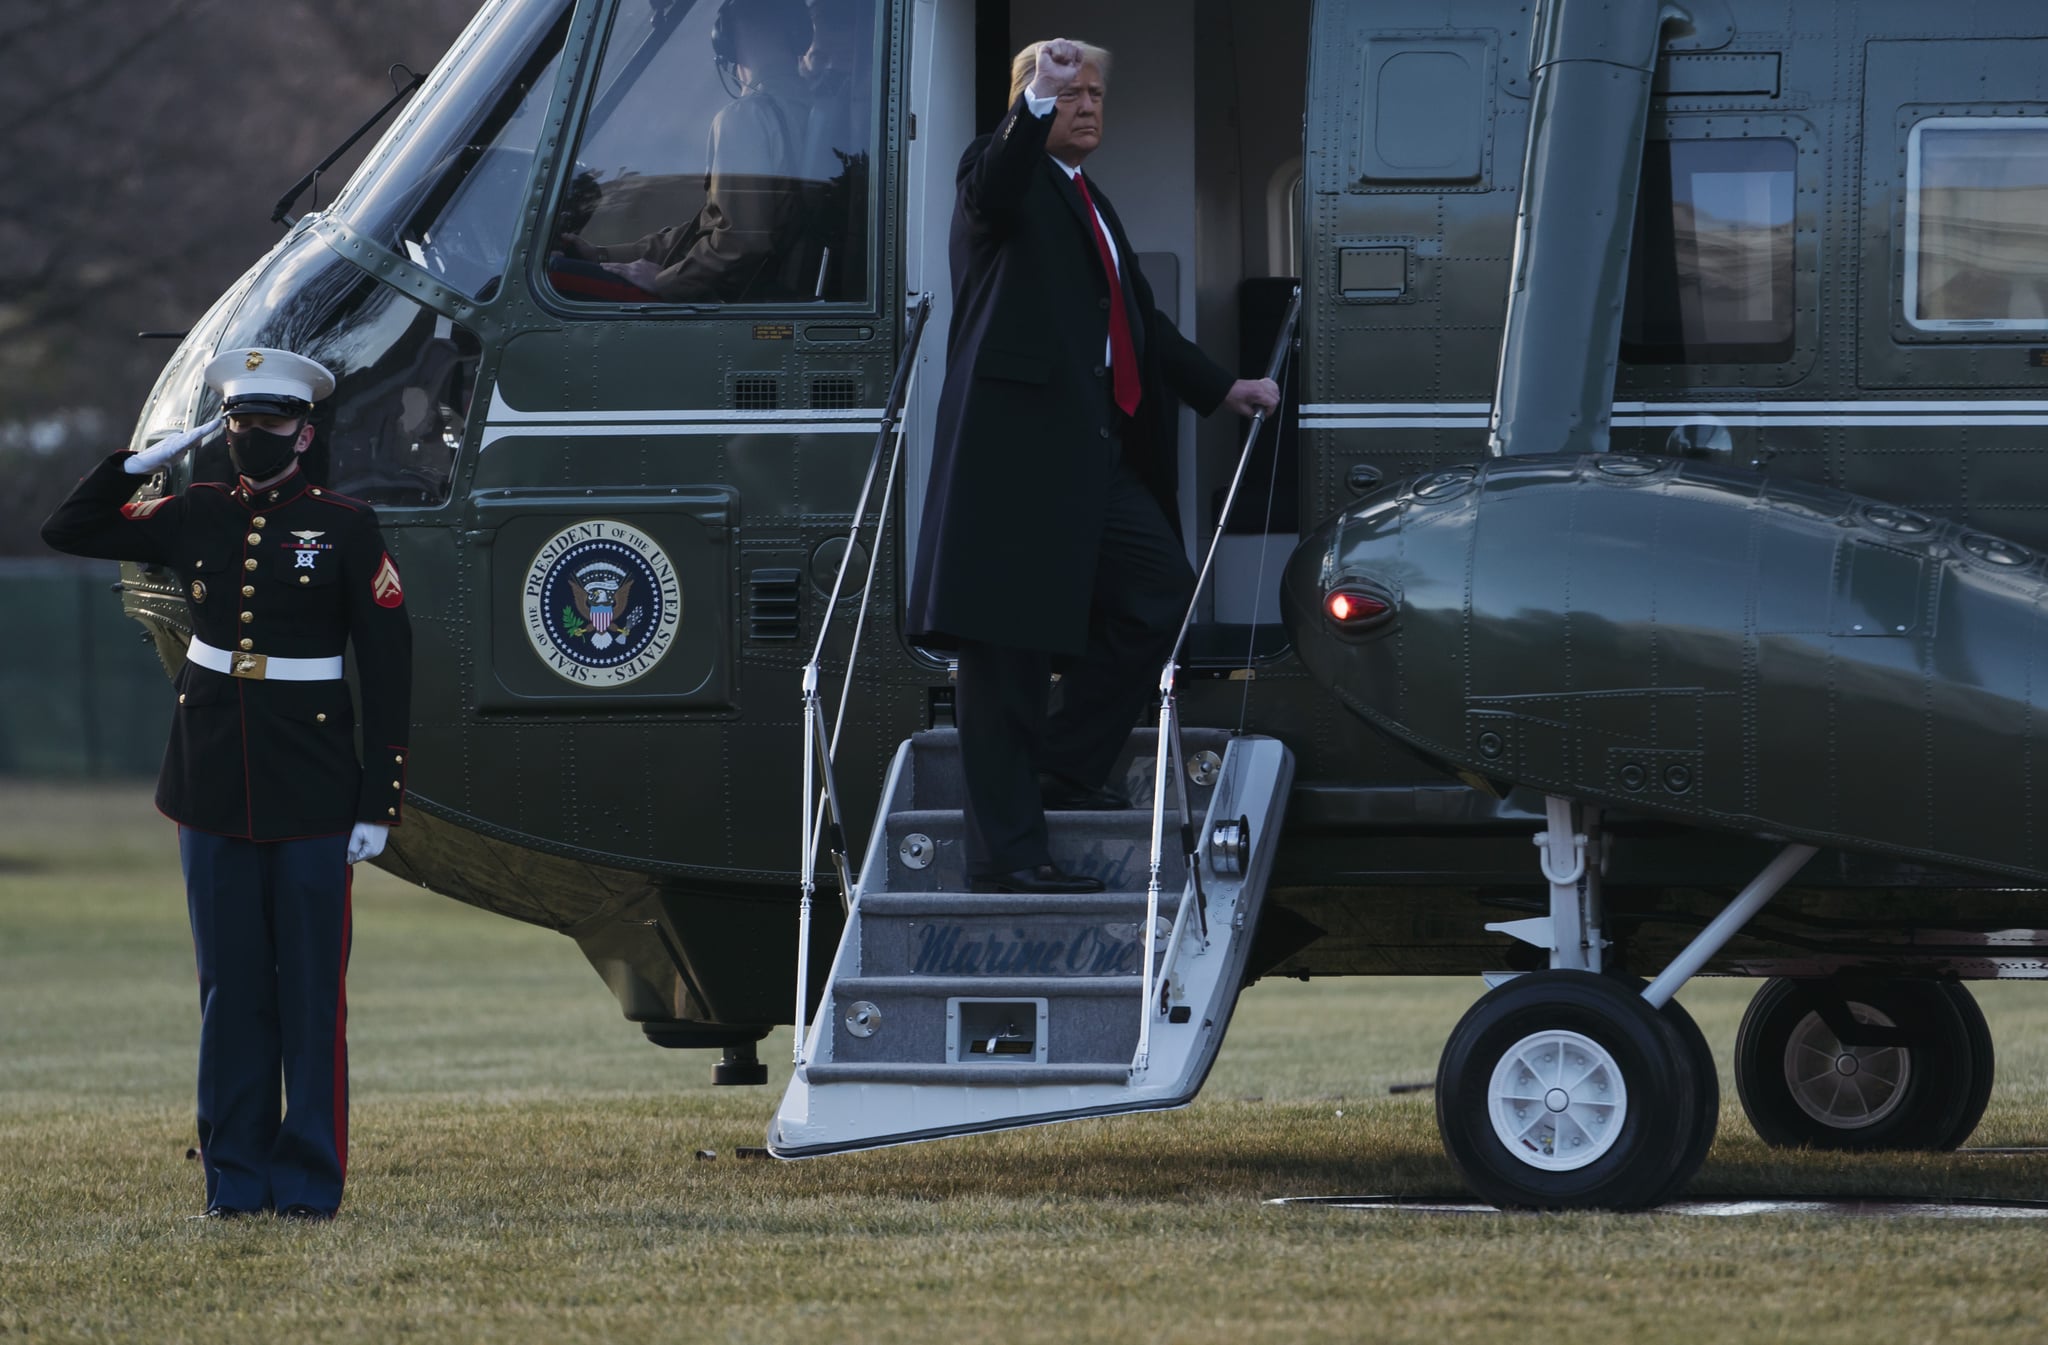 WASHINGTON, DC - JANUARY 20: President Donald Trump and first lady Melania Trump board Marine One as they depart the White House on January 20, 2021 in Washington, DC. President Trump is making his scheduled departure from the White House for Florida, several hours ahead of the inauguration ceremony for his successor Joe Biden, making him the first president in more than 150 years to refuse to attend the inauguration. (Photo by Eric Thayer/Getty Images)